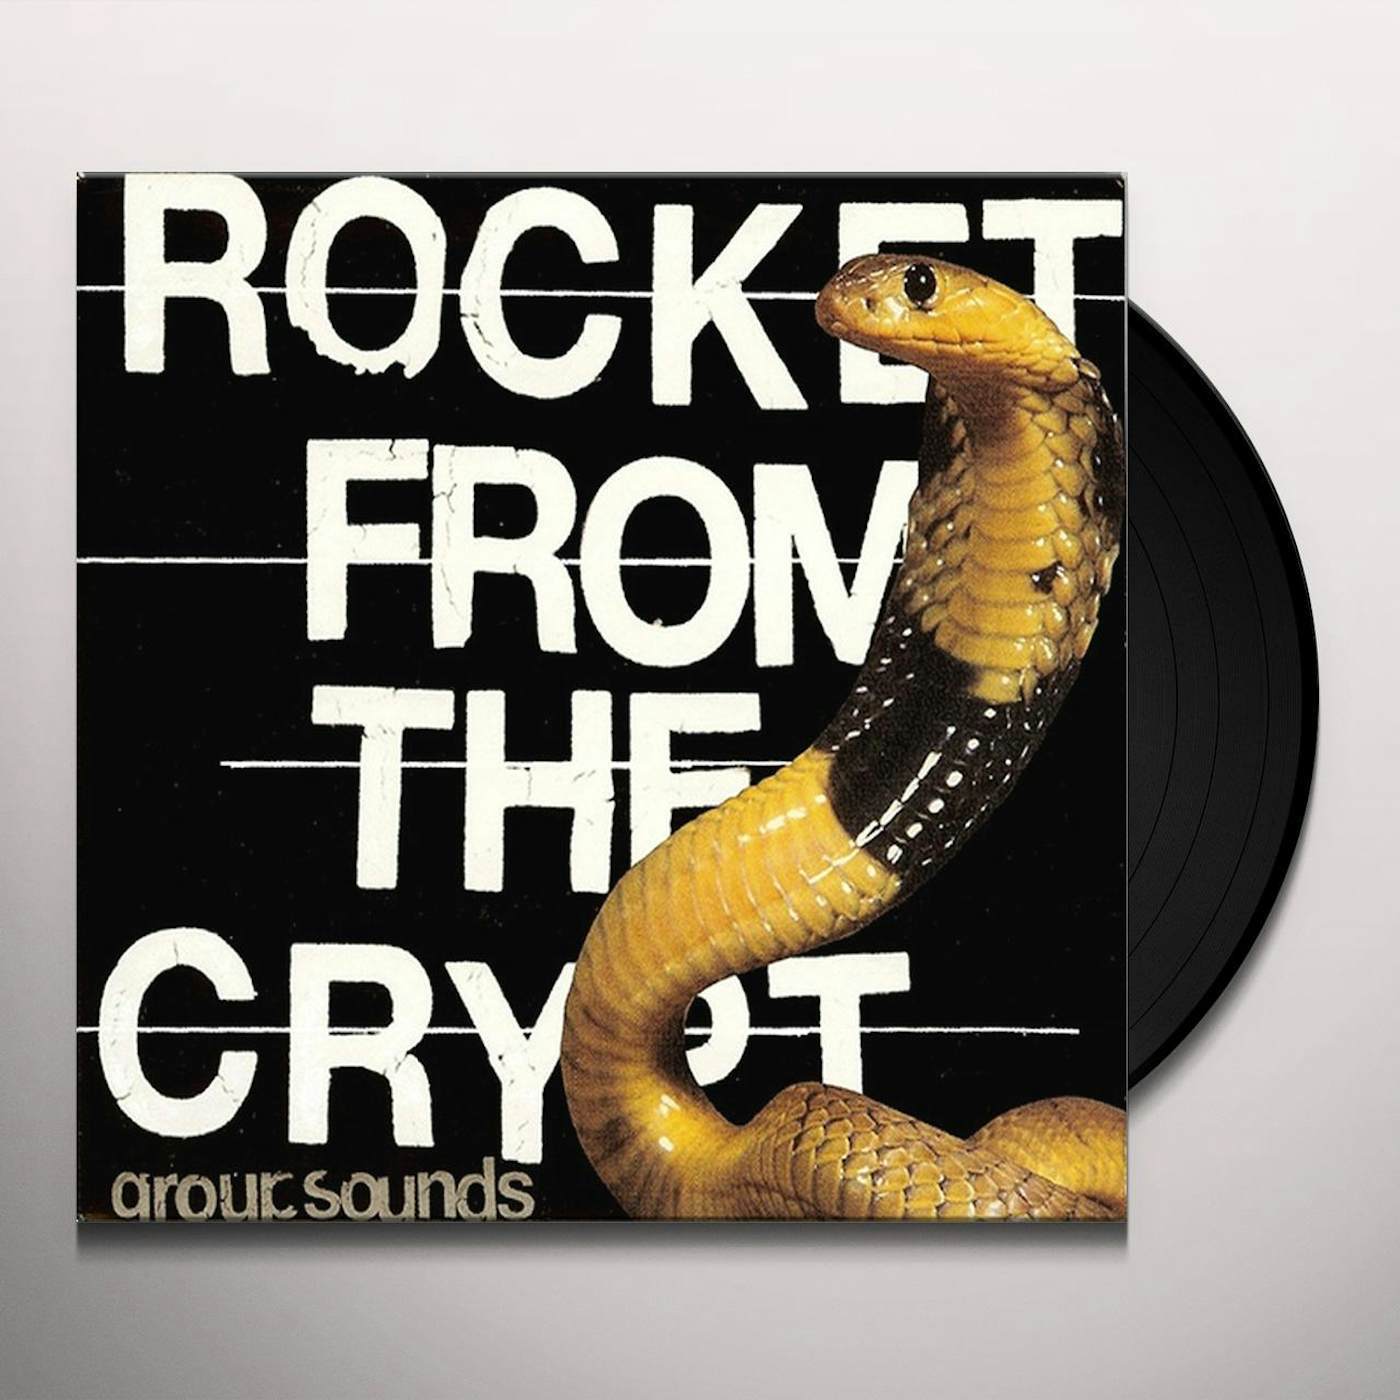 Rocket From The Crypt Group Sounds Vinyl Record